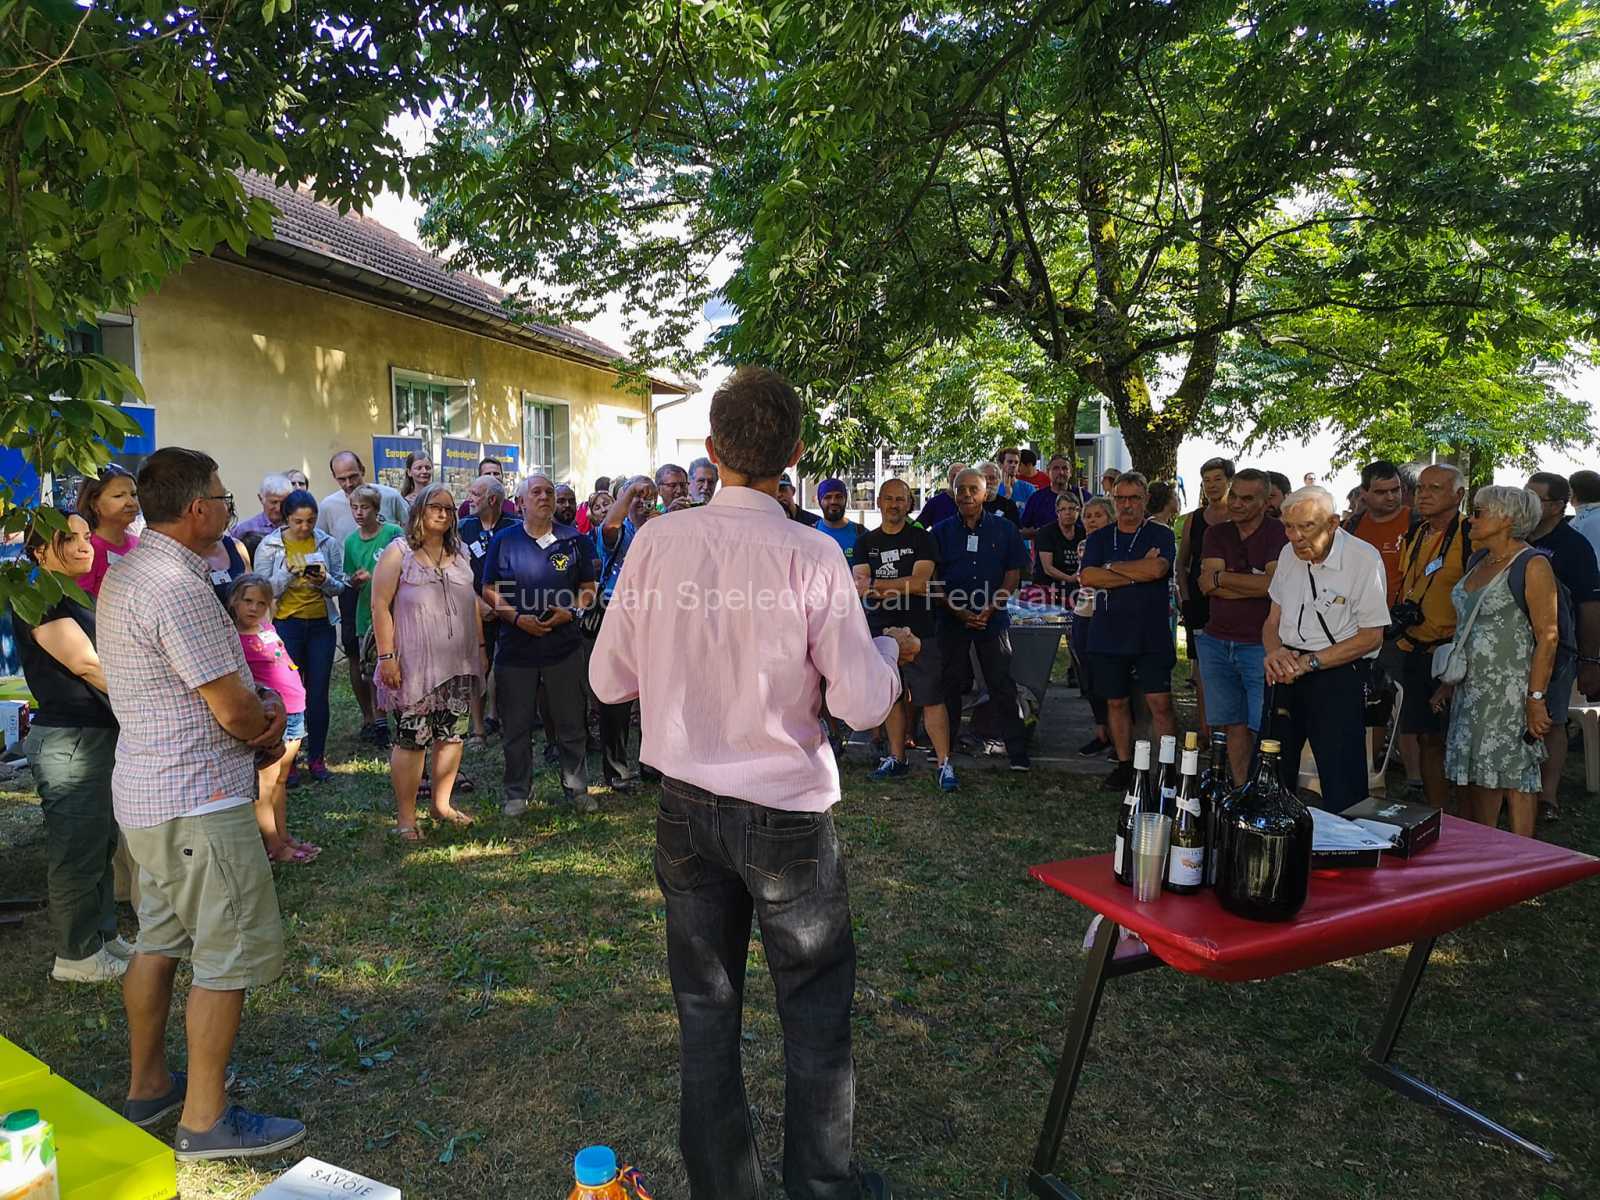 Lively apéro under the trees celebrating 30 years FSE. Photo by Ernest Geyer